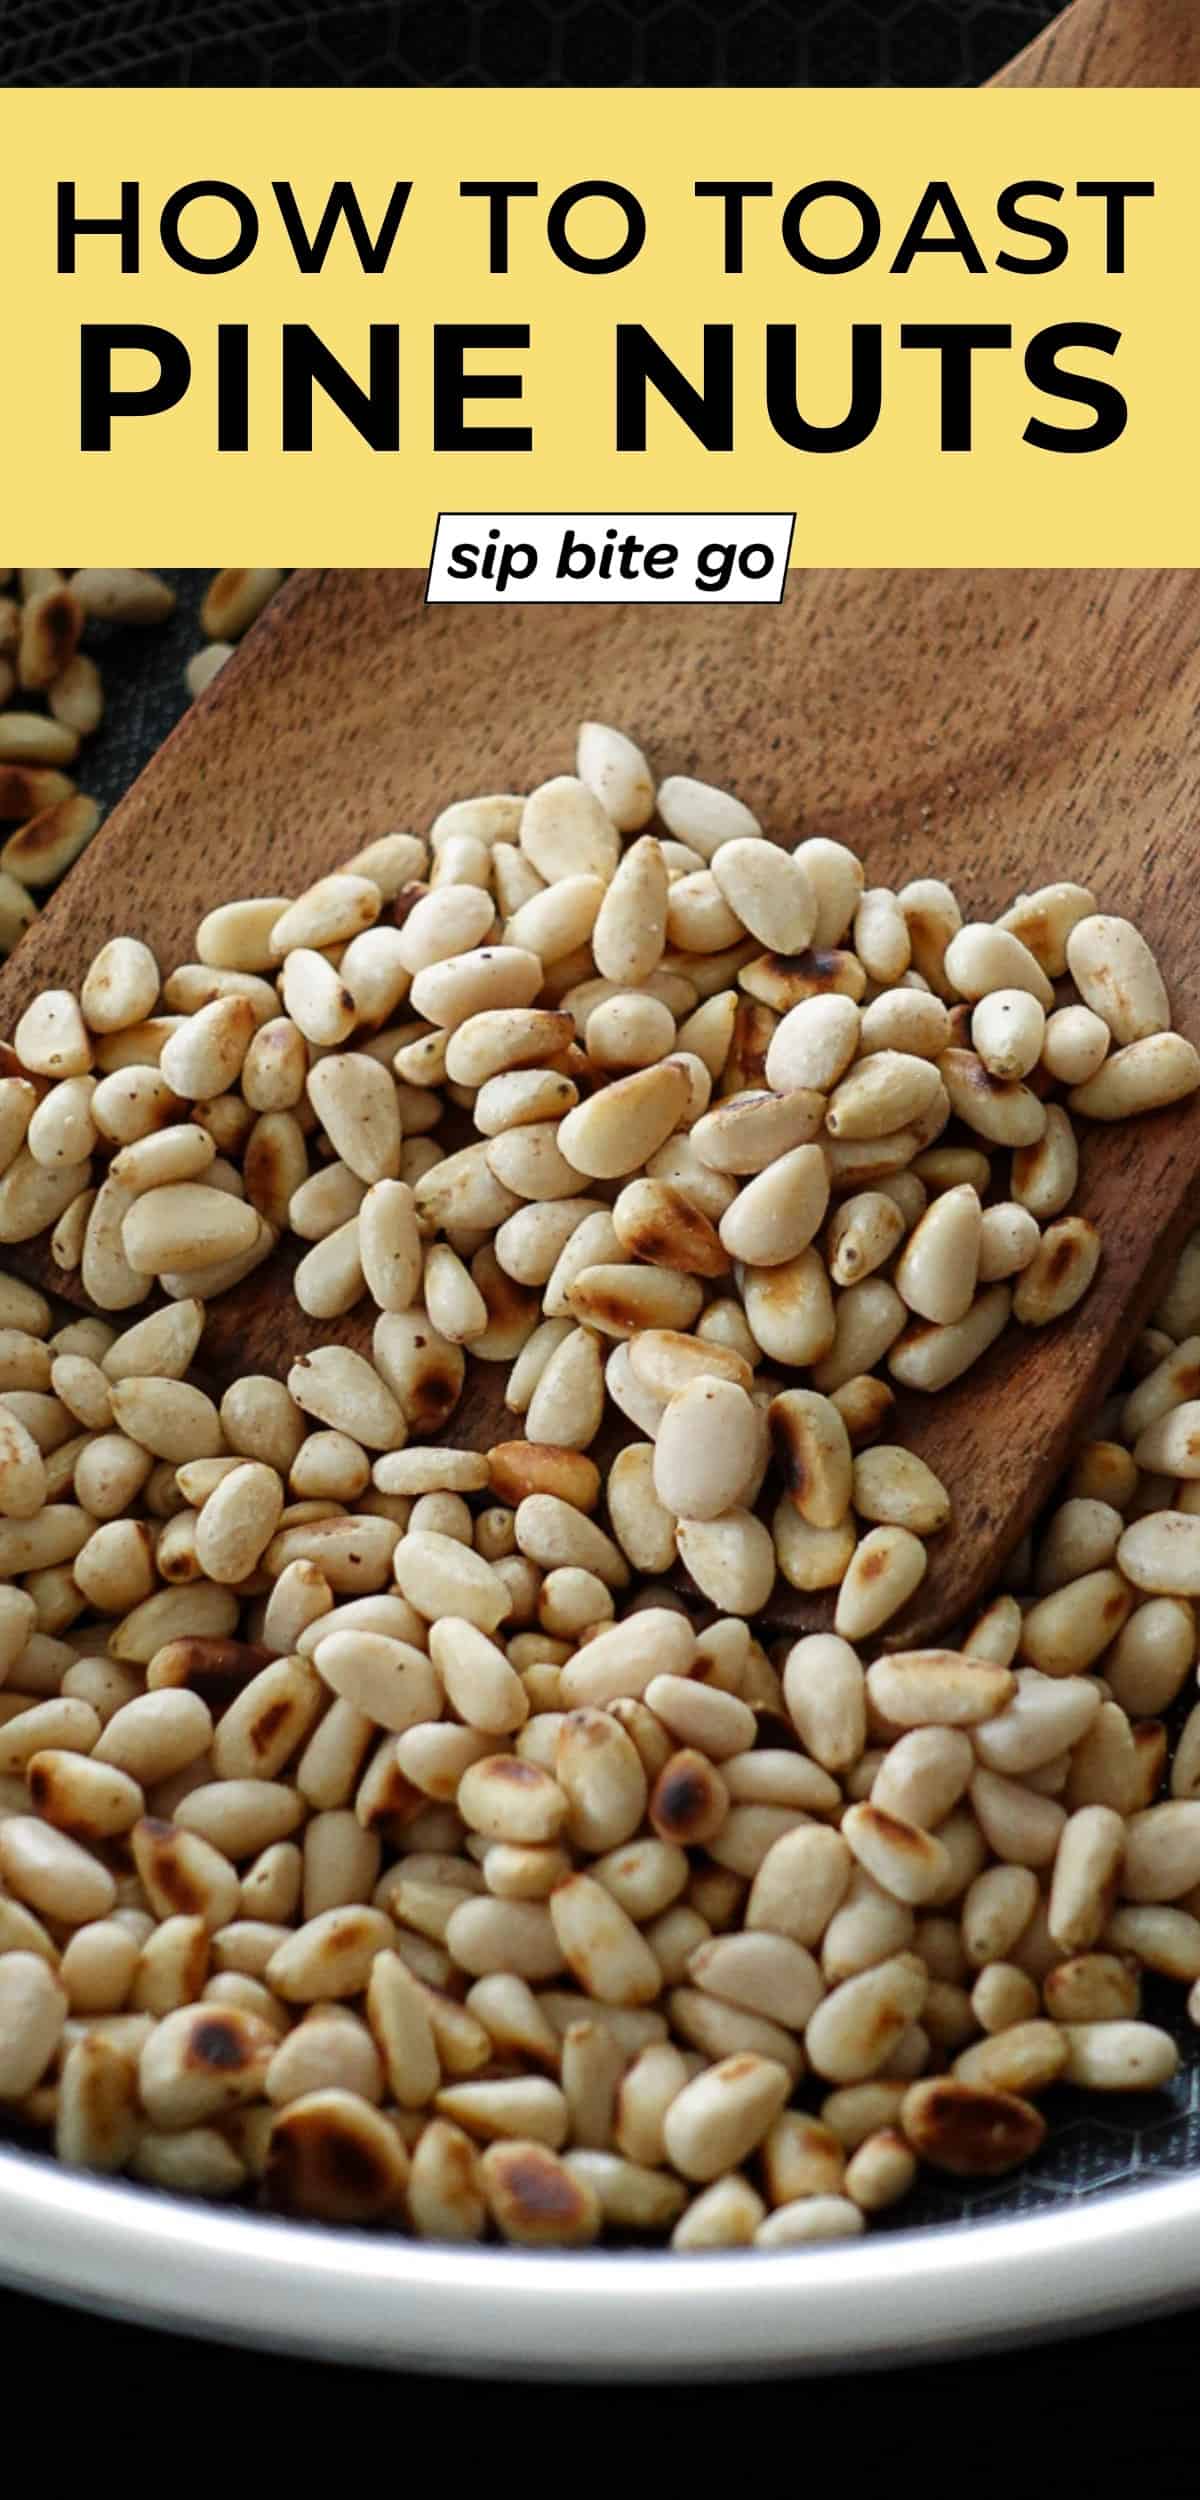 How To Toast Pine Nuts recipe image with text overlay SipBiteGo